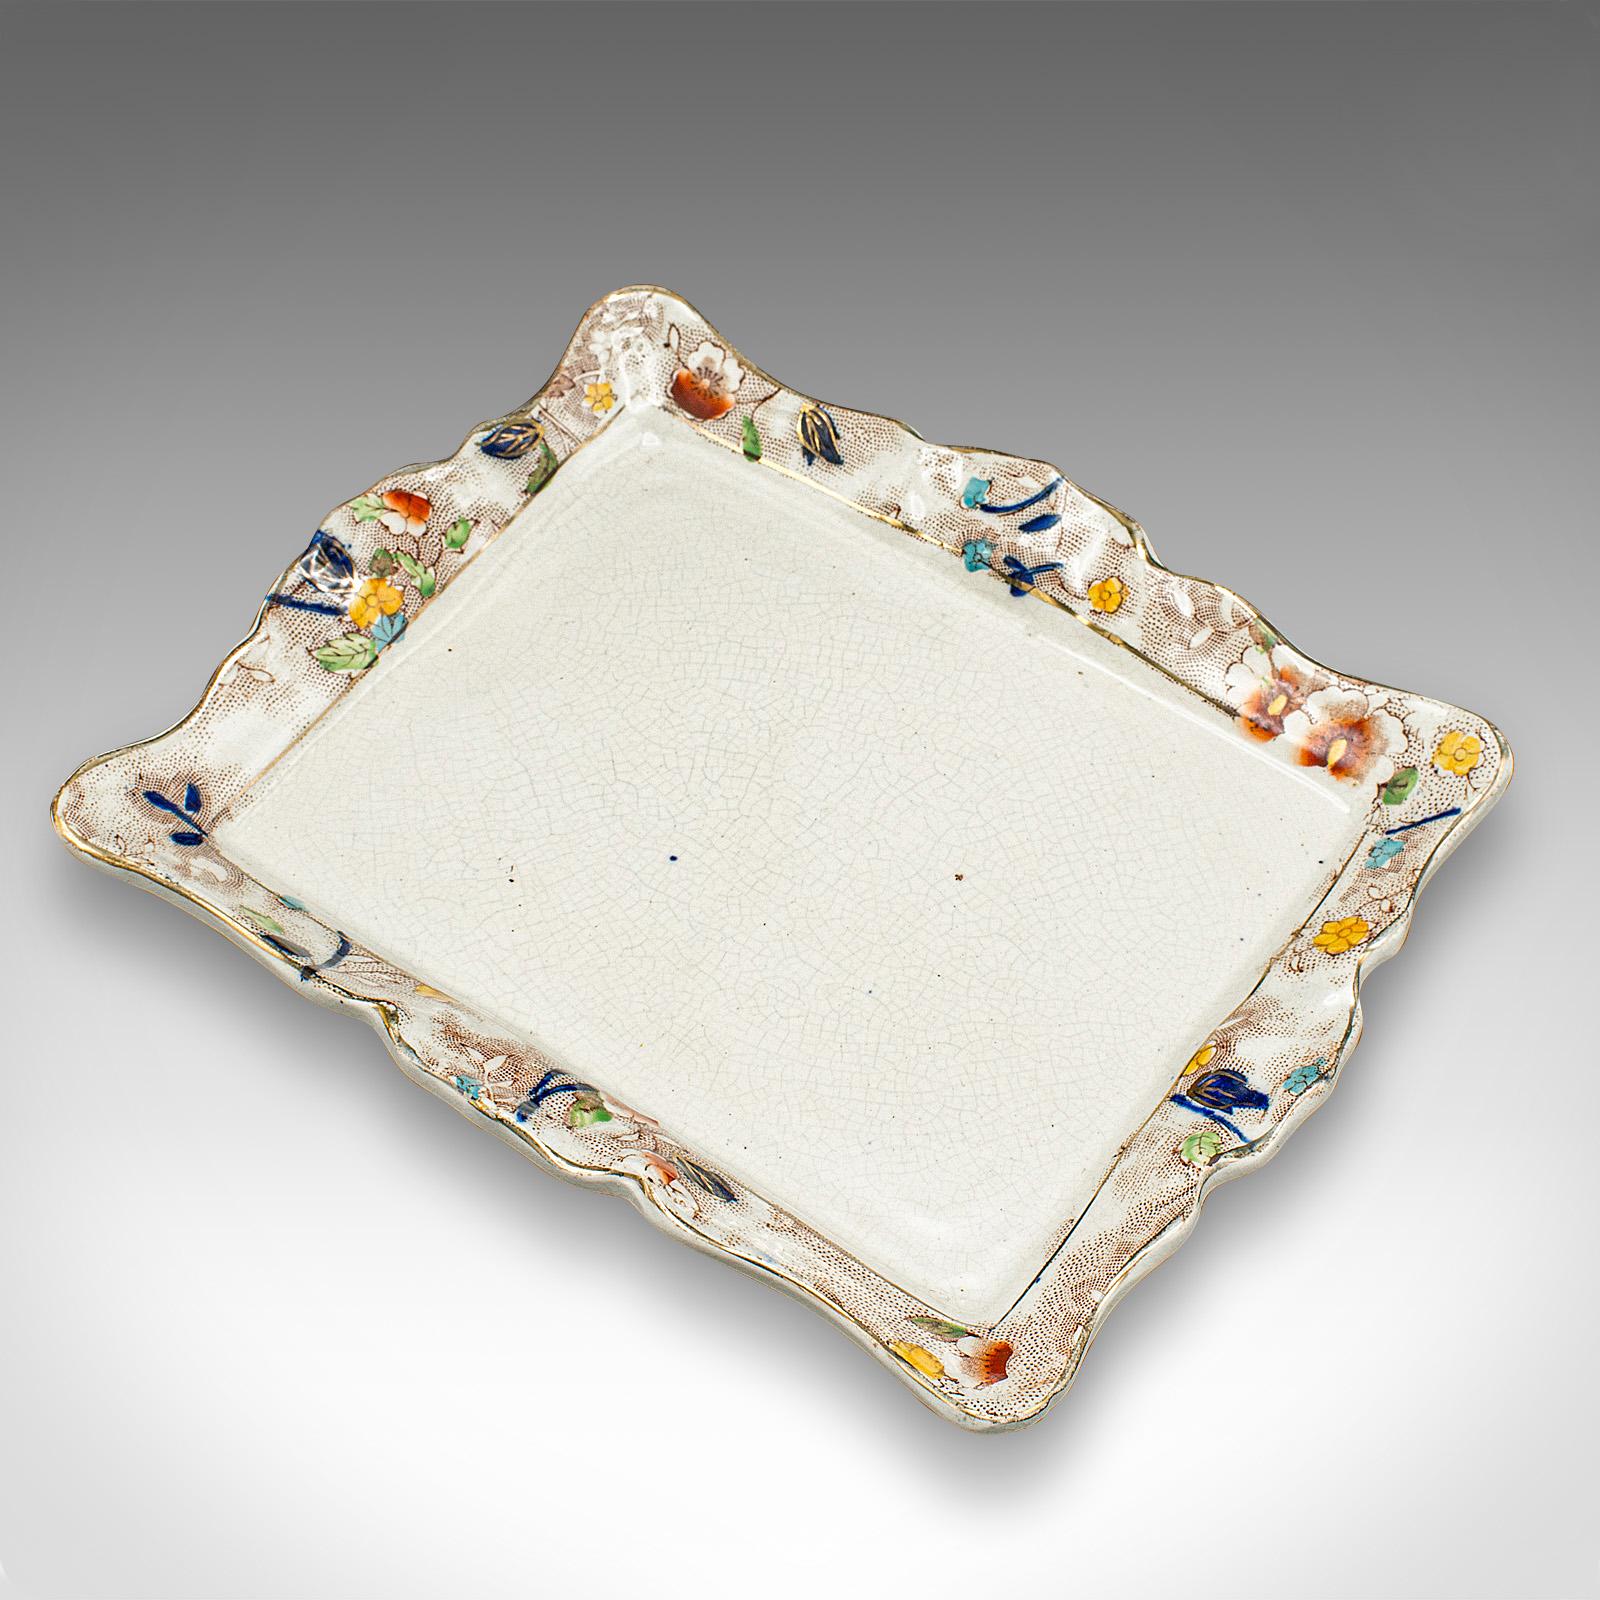 Antique Cheese Keeper, English, Ceramic, Decorative Butter Dish, Victorian, 1900 For Sale 2